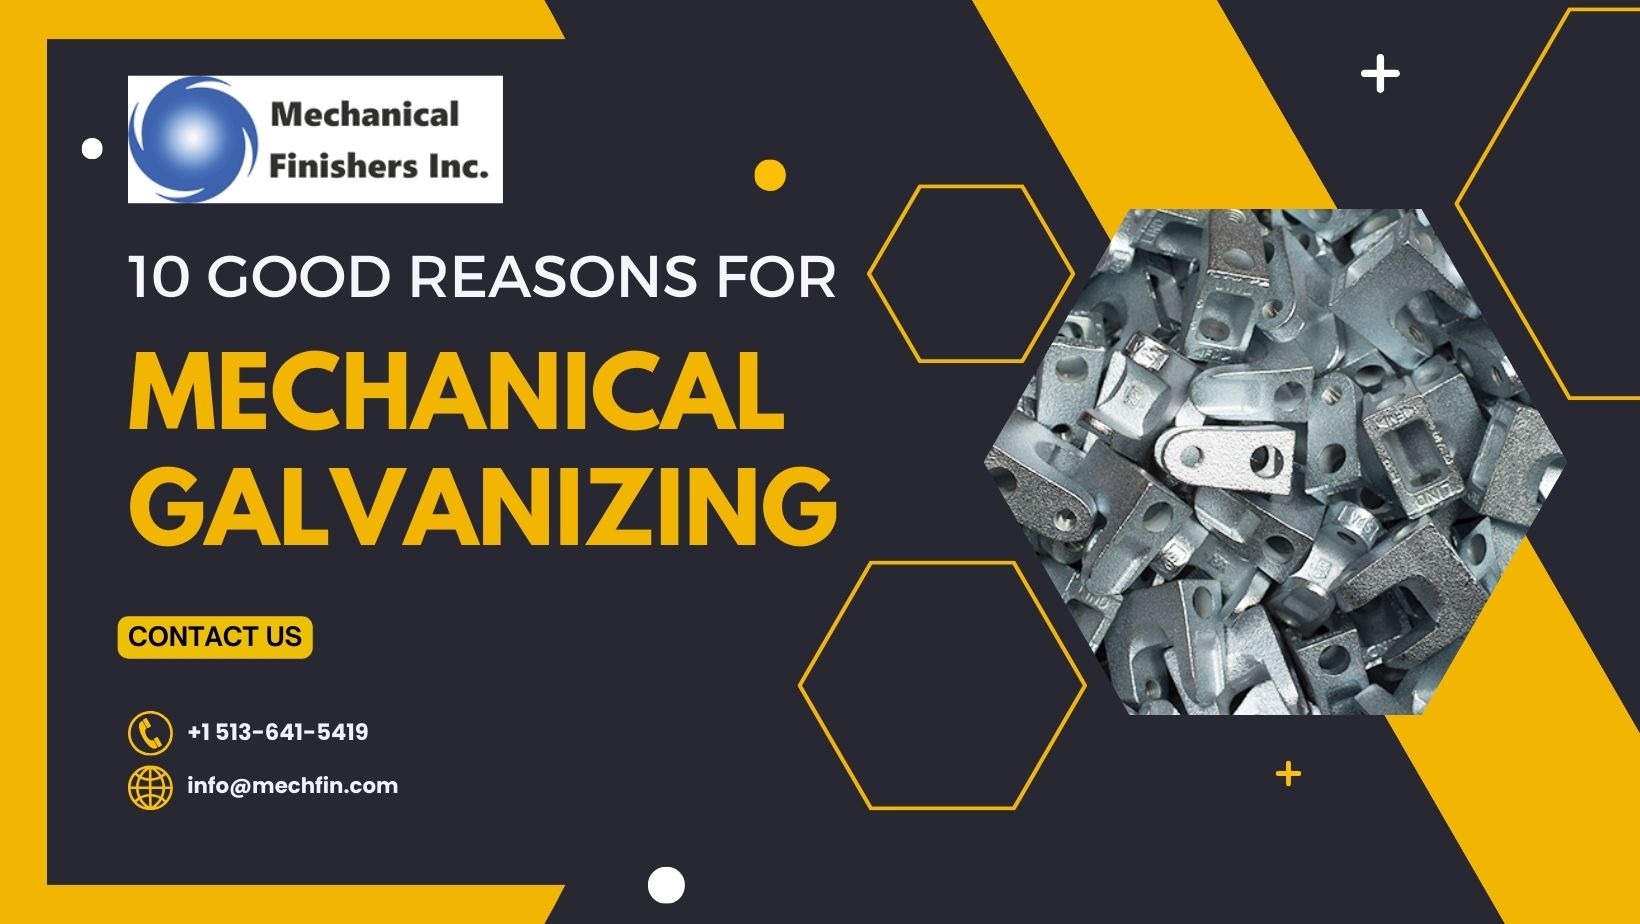 10 Good Reasons For Mechanical Galvanizing